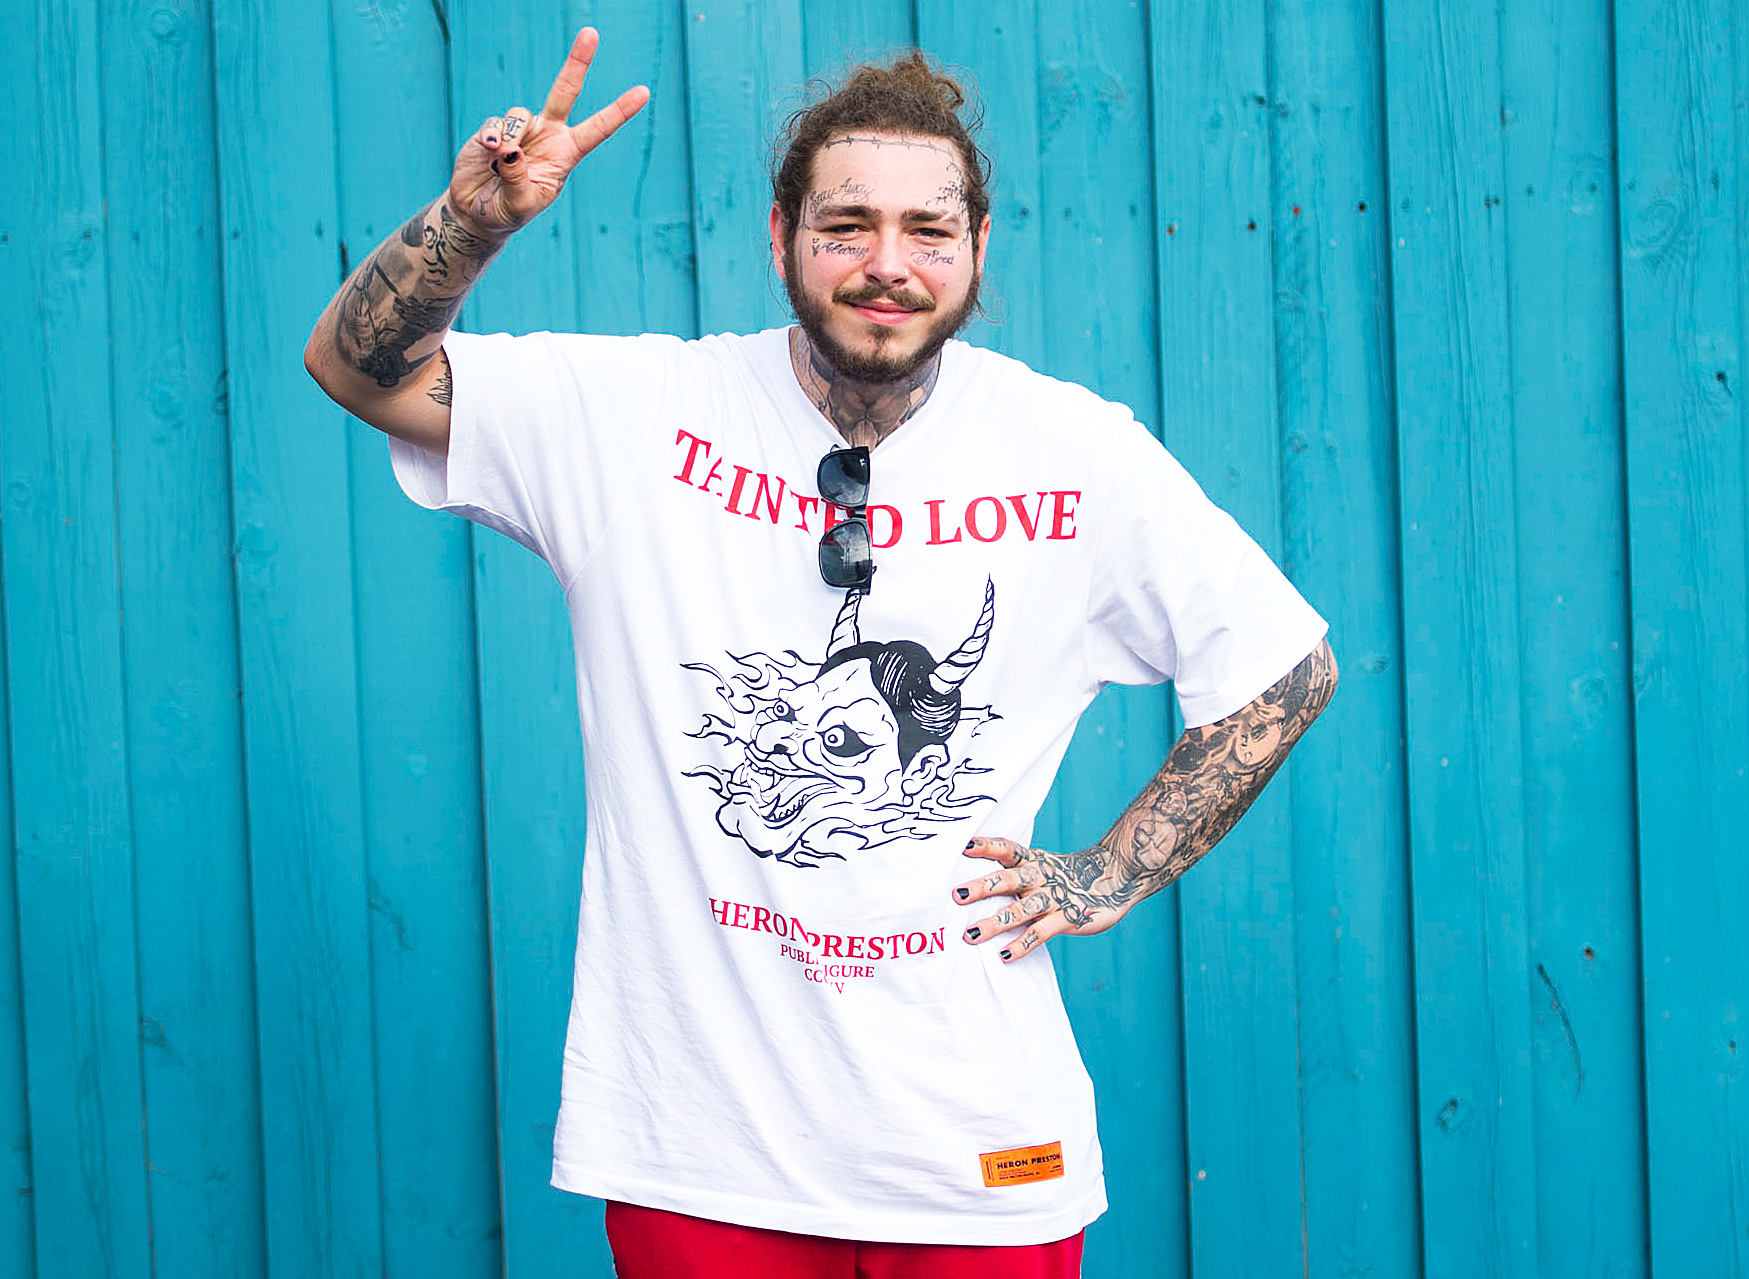 Post Malone Slams People Who Wished Death During Plane Scare